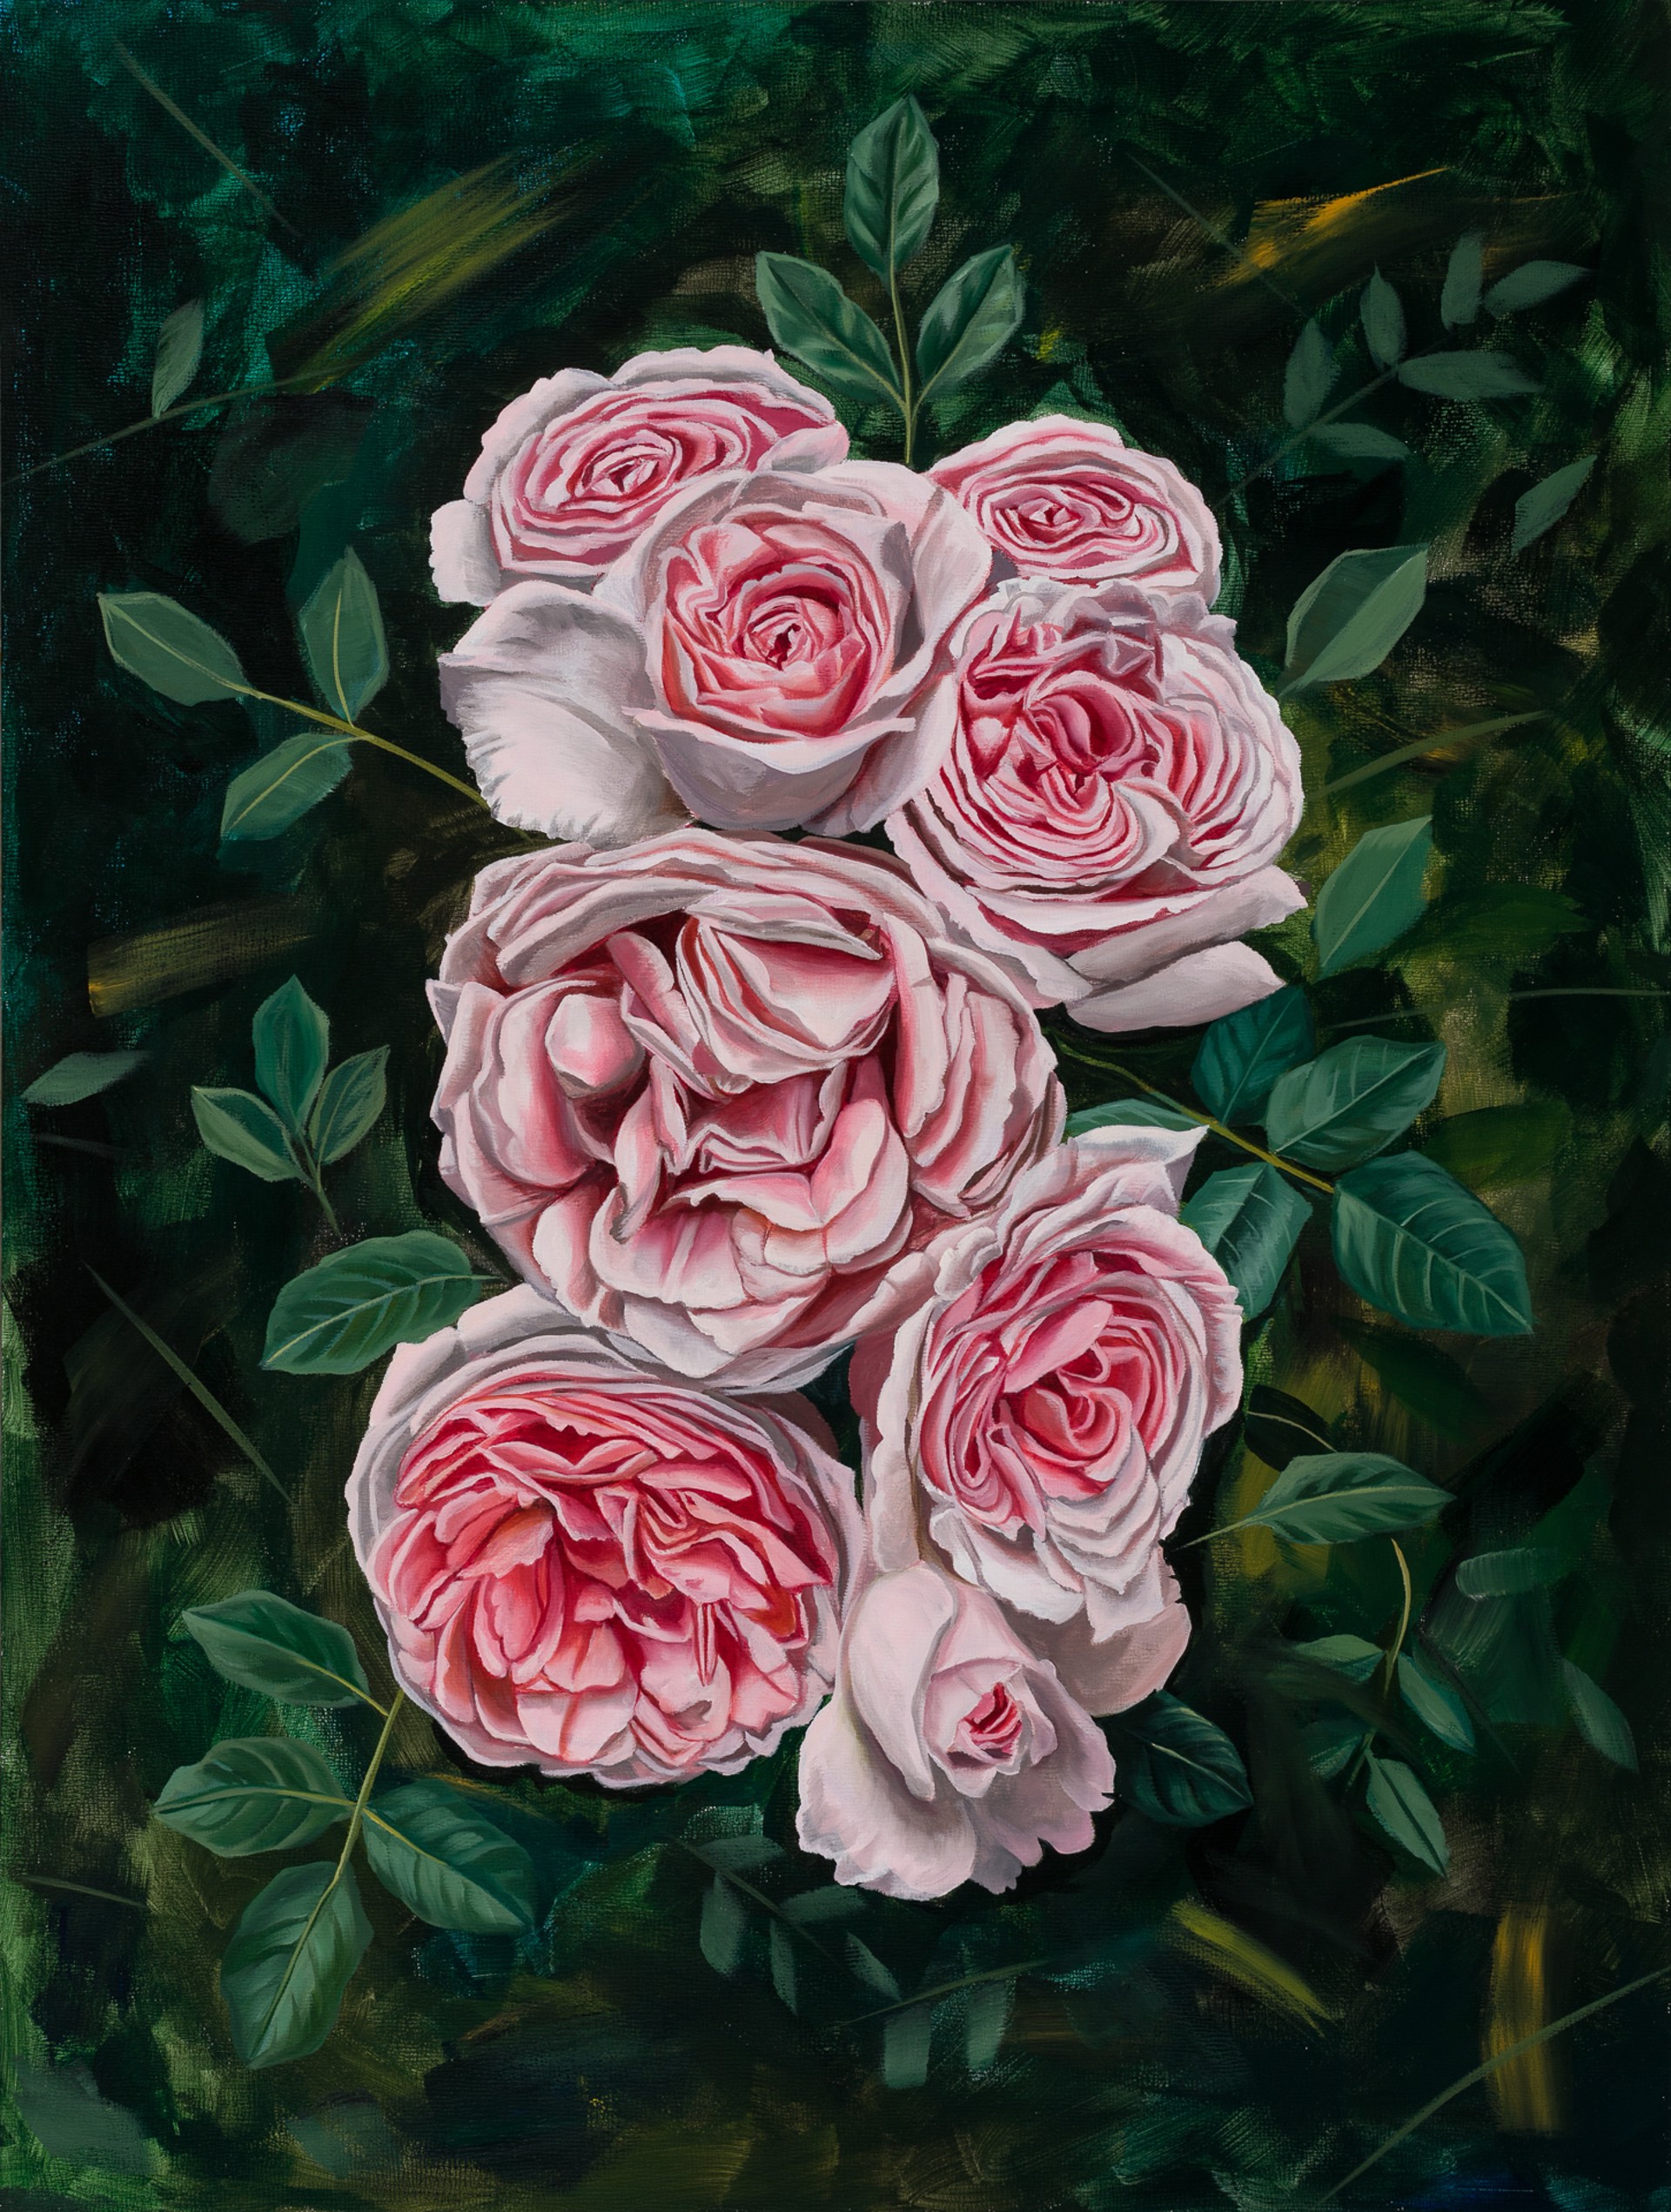 Cluster of Roses by Robin Hextrum